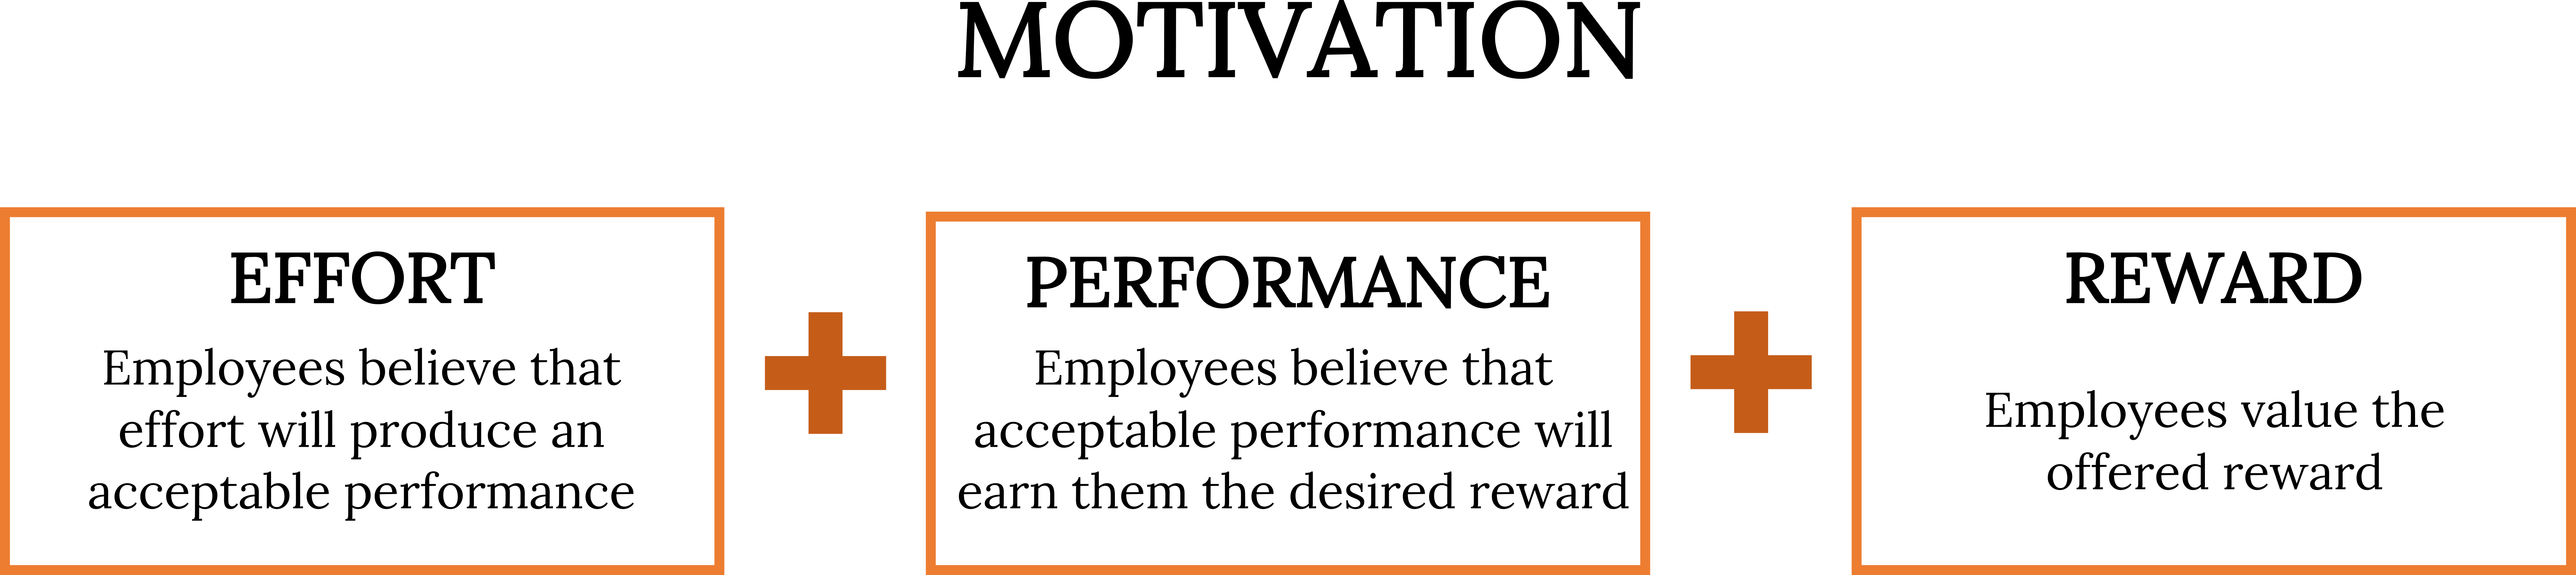 Motivation = 'Effort: employees believe that effort will produce an acceptable performance.' plus 'Perfornamnce: employees believe that acceptable performance will earn them the desired reward.' plus 'Reward: employees value the offered reward.'